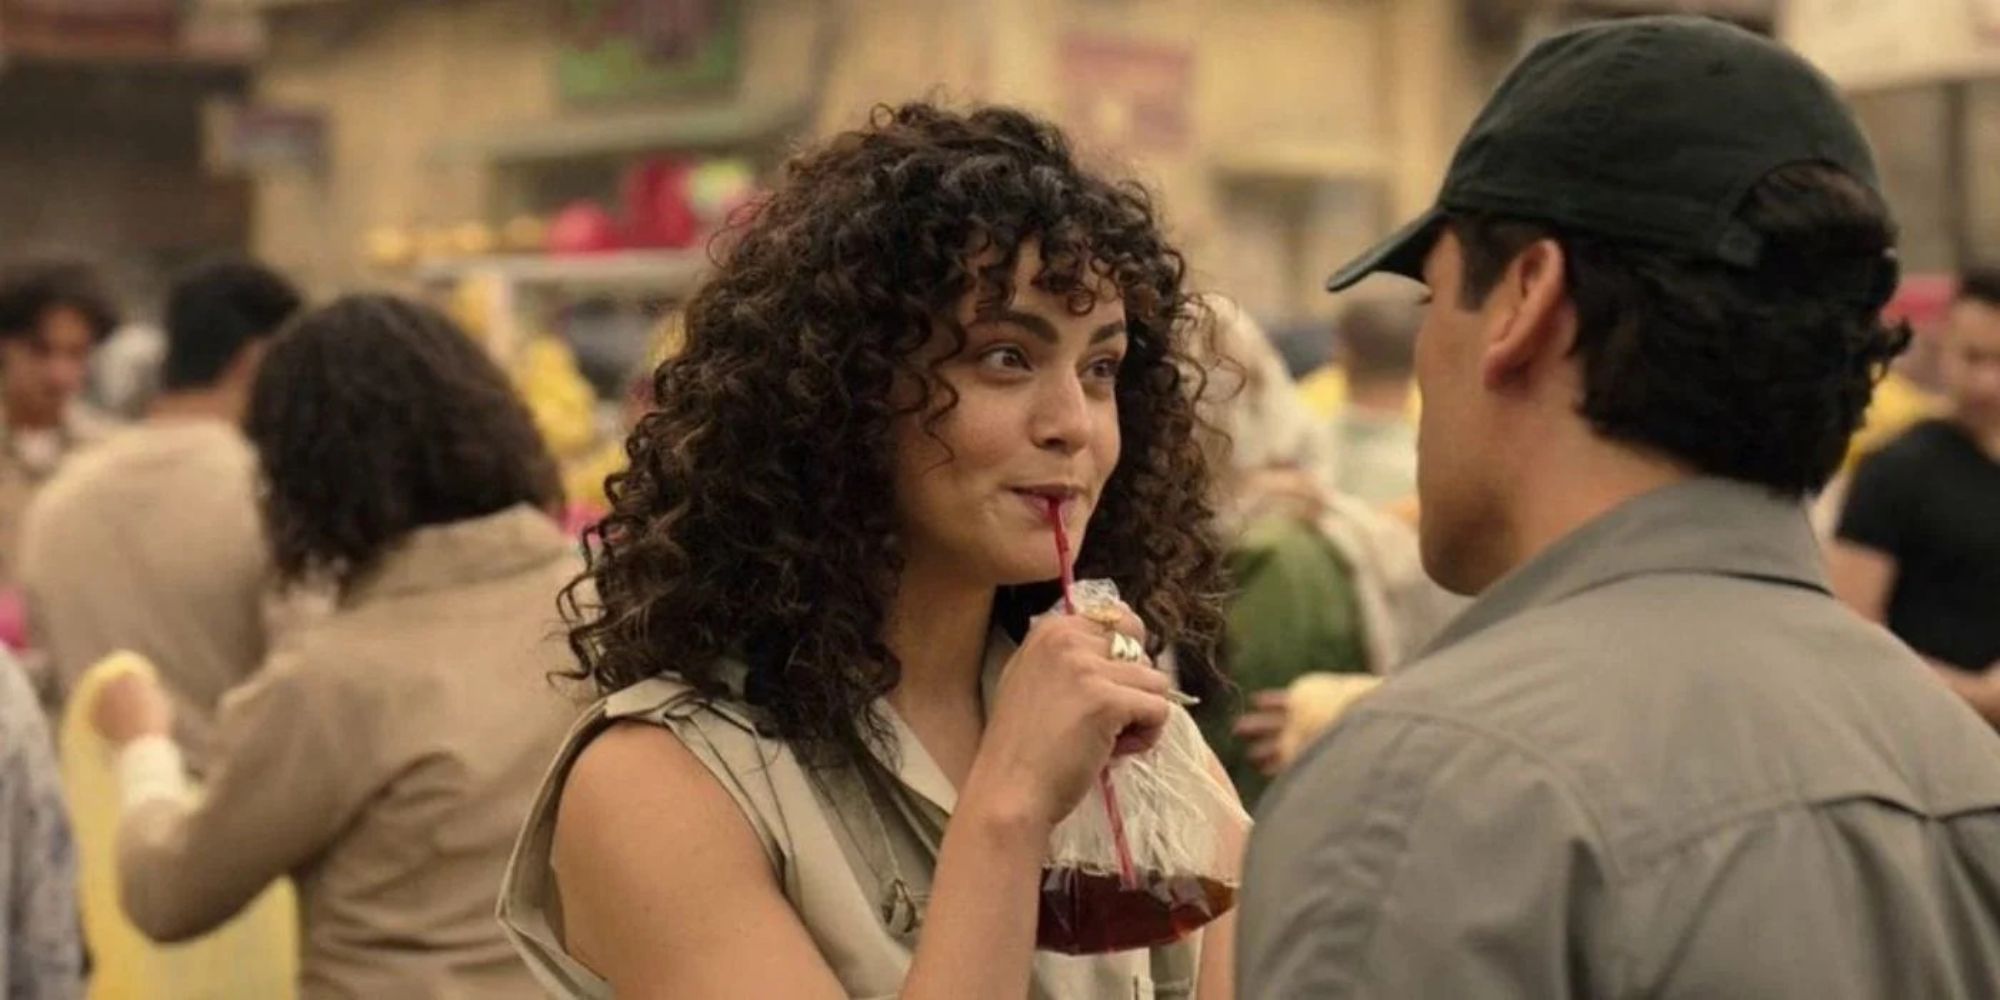 A curly-haired woman is drinking from a plastic bag while talking to a man